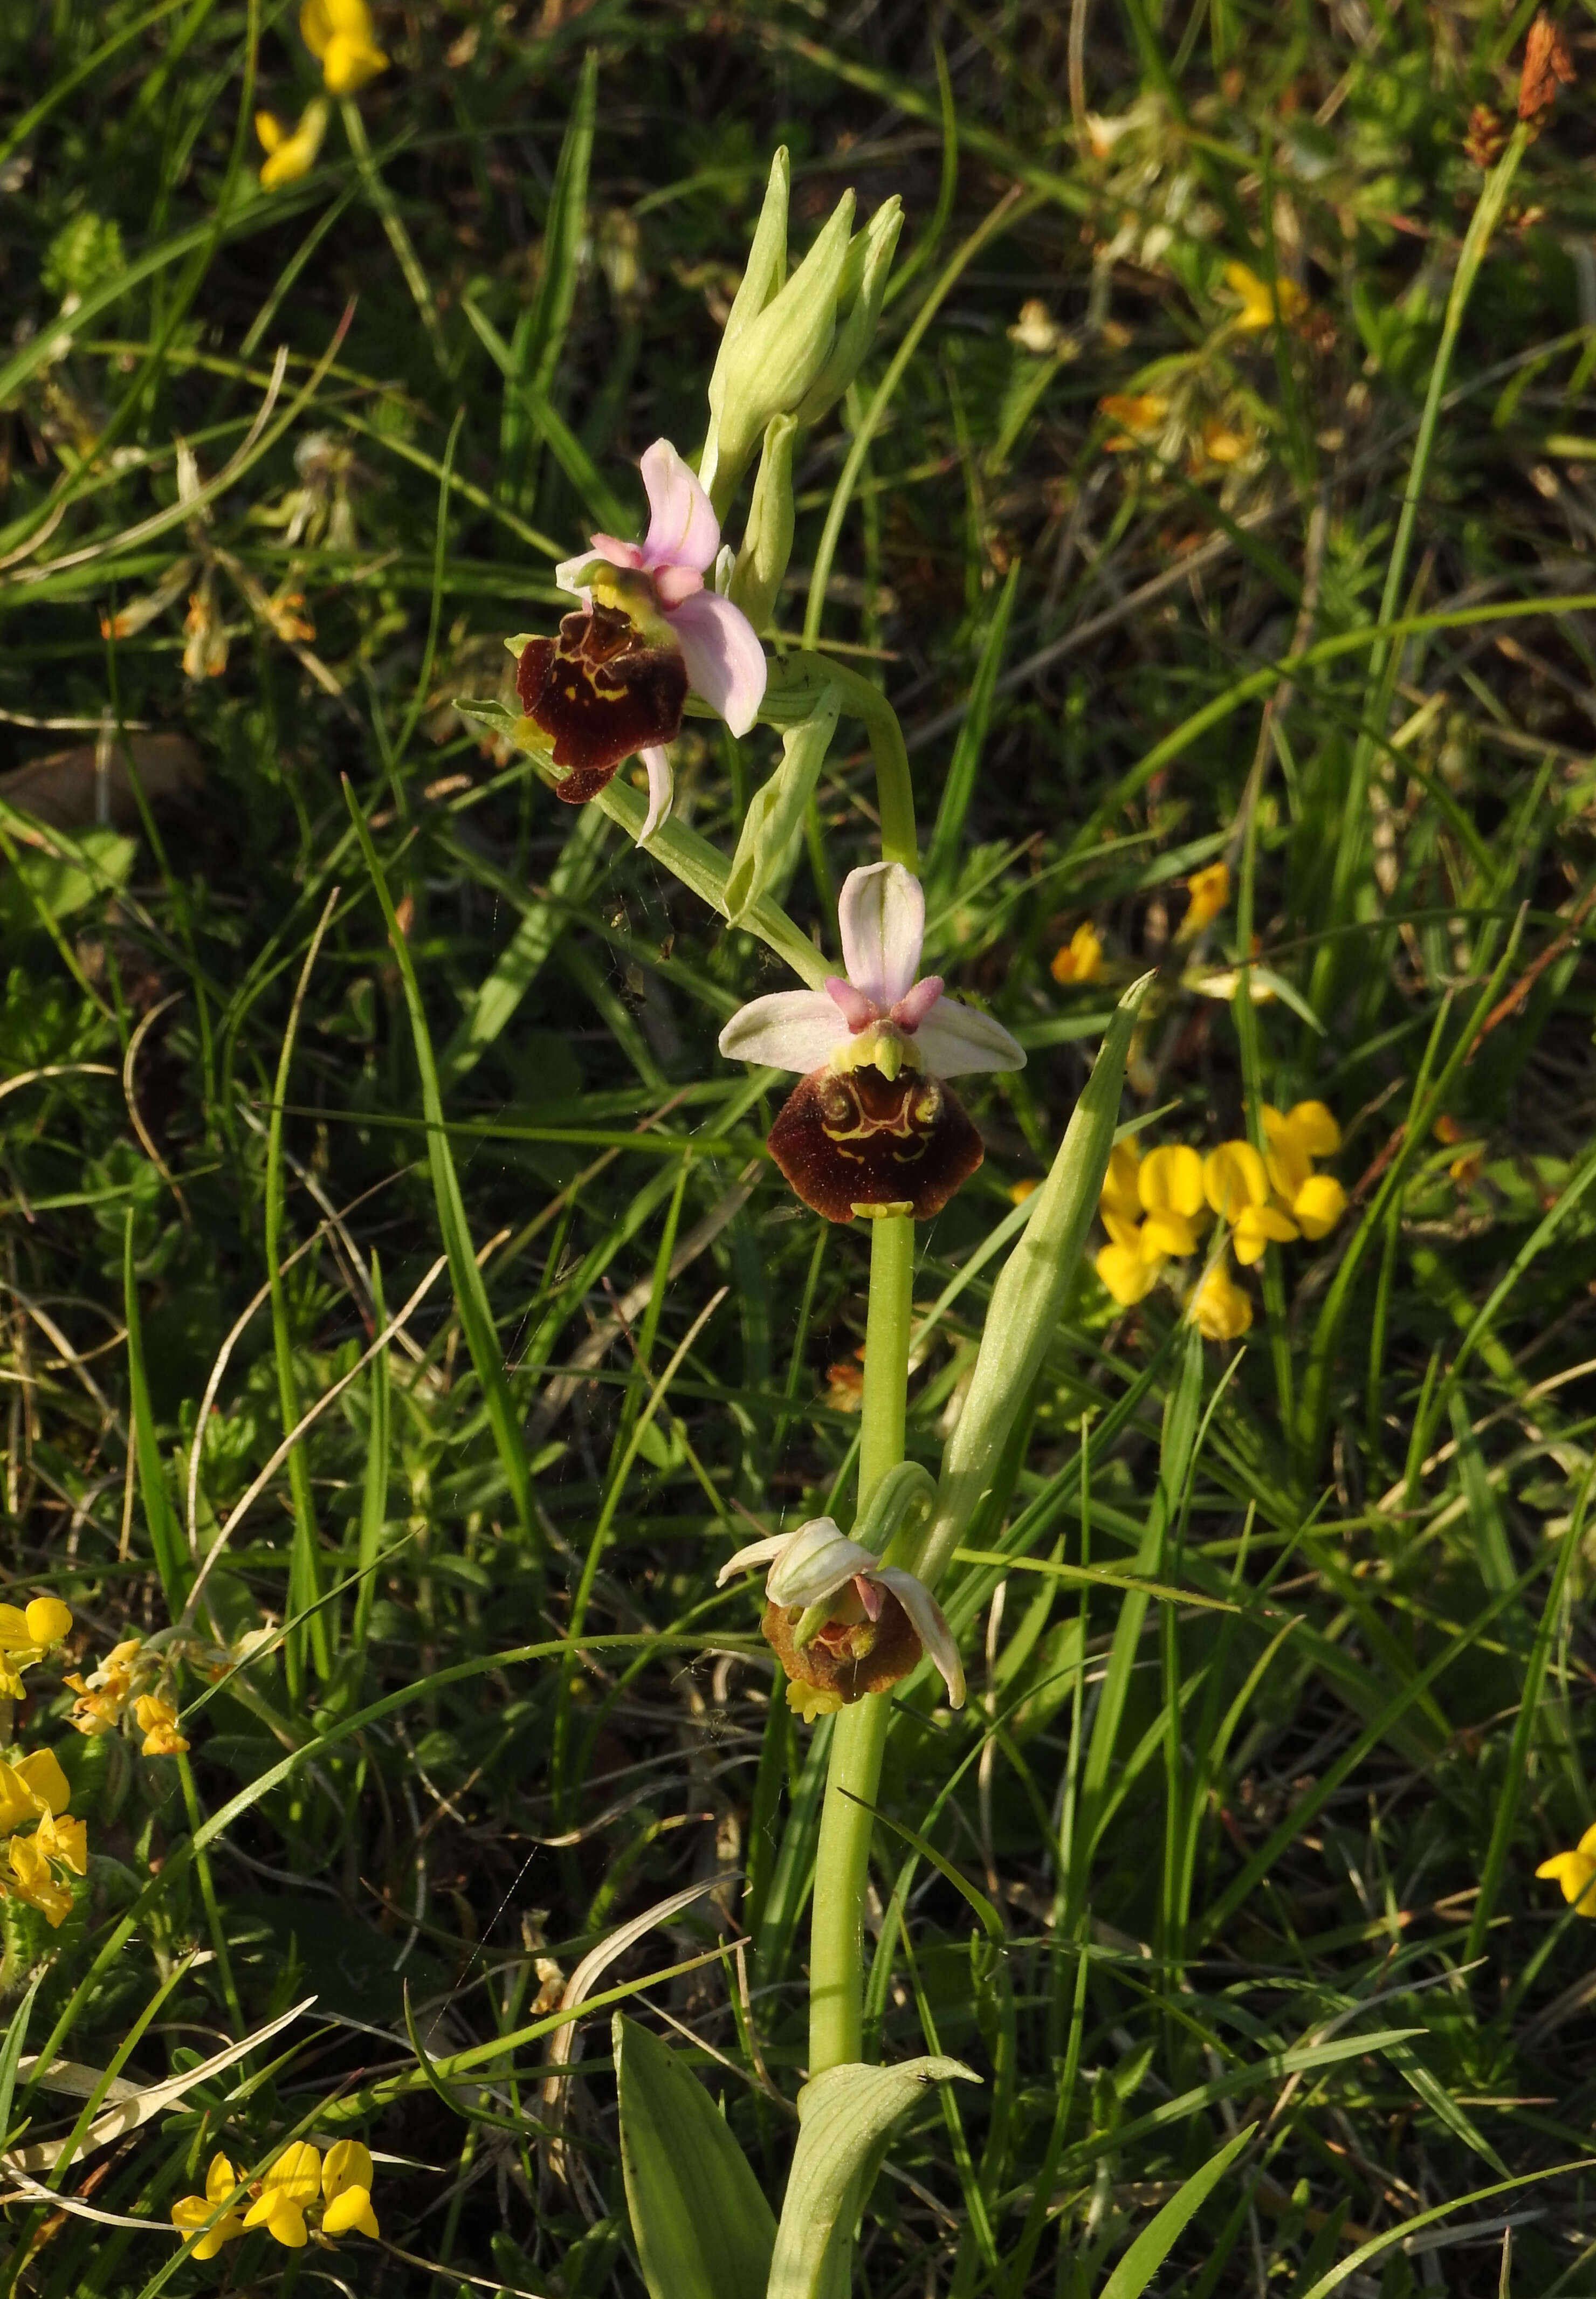 Image of late spider-orchid